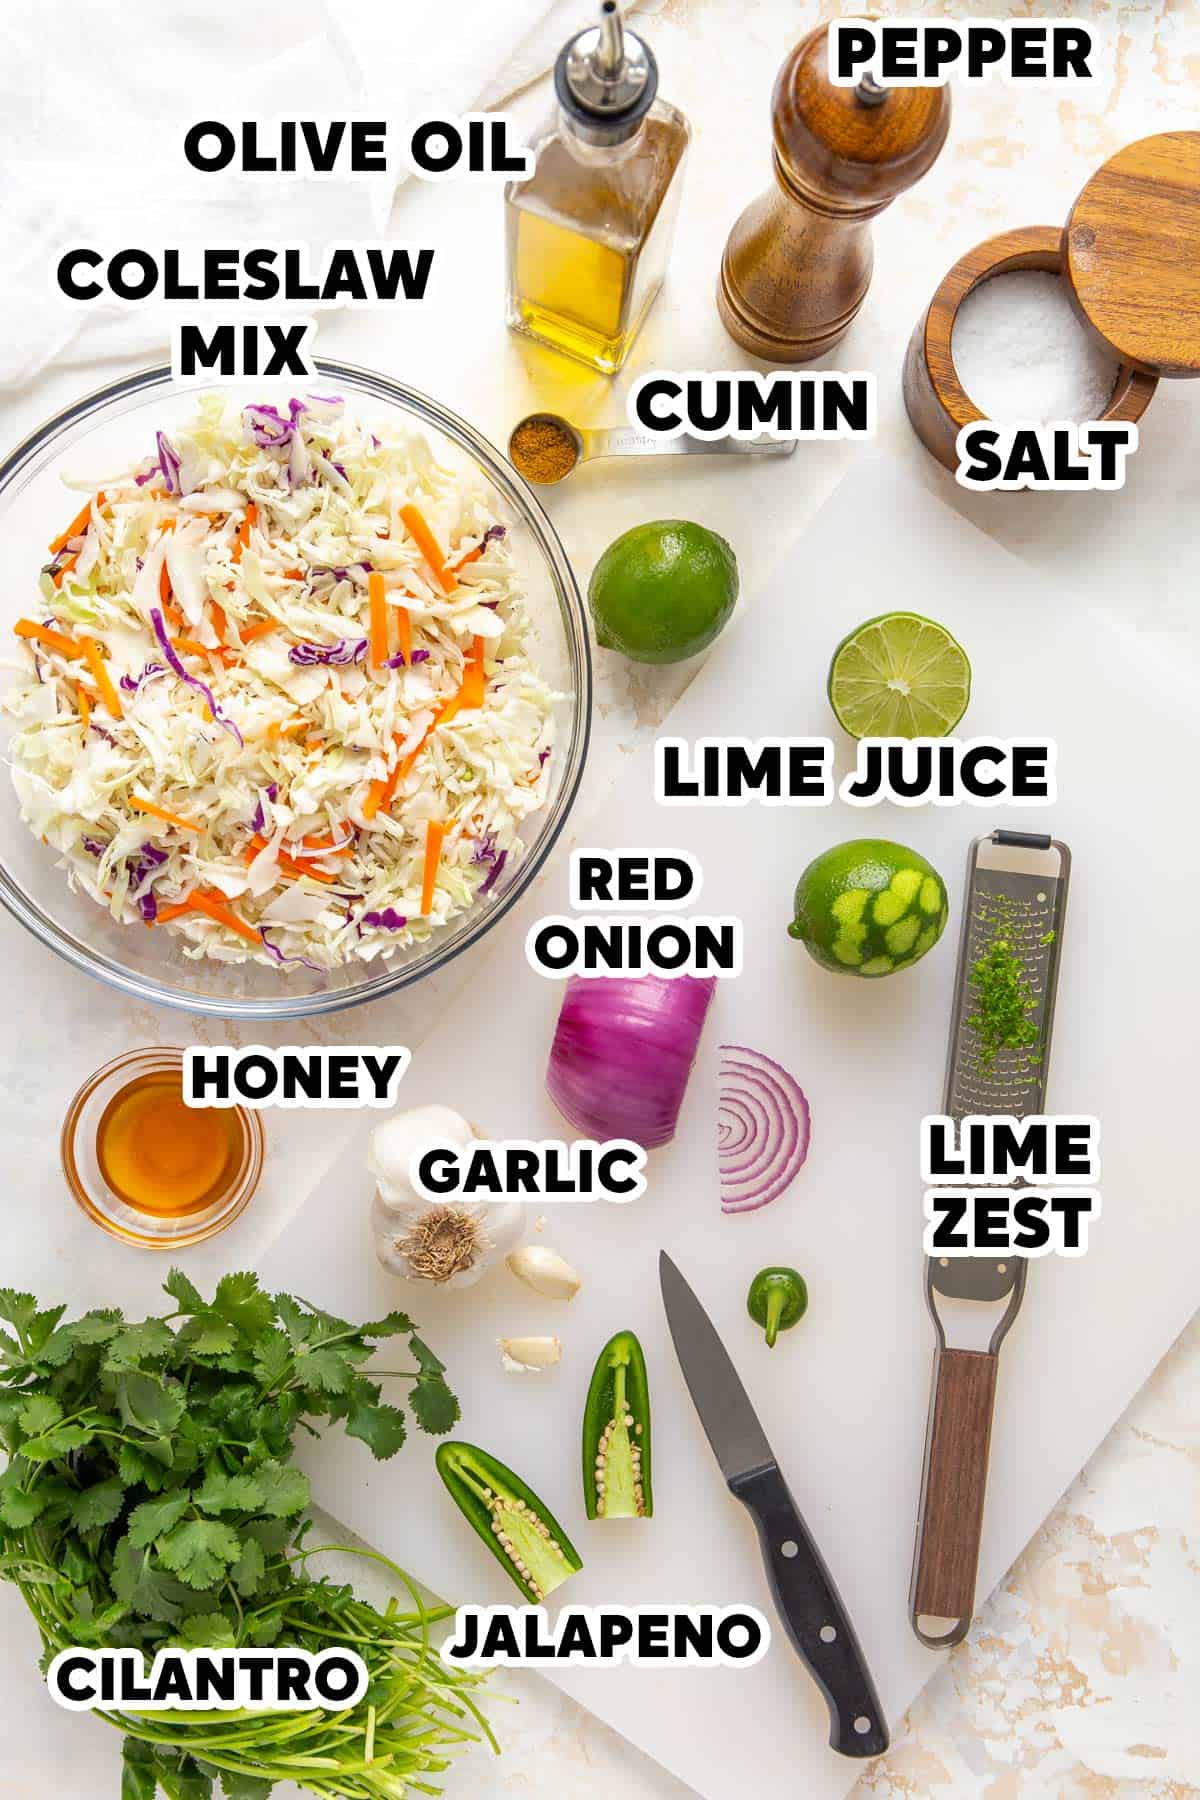 Overhead view of ingredients for making Mexican coleslaw with overlay text.